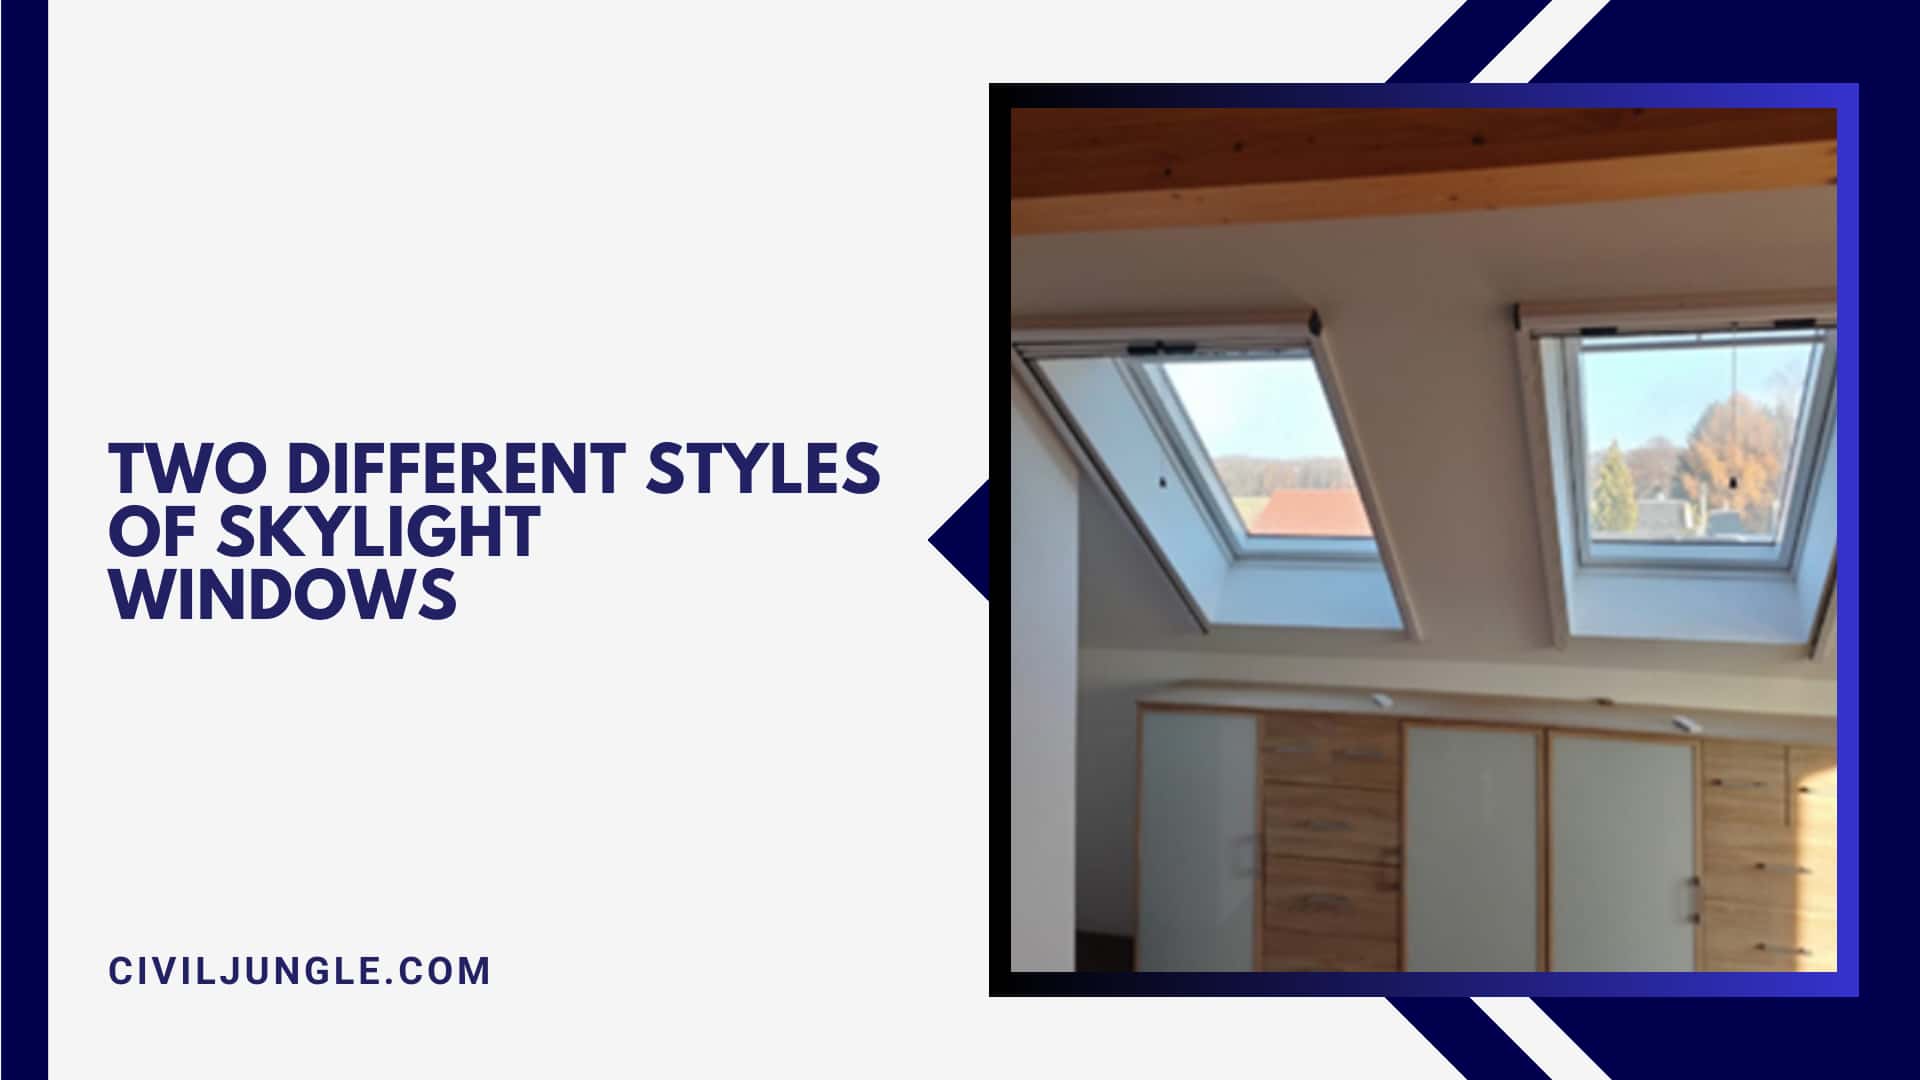 Two Different Styles of Skylight Windows